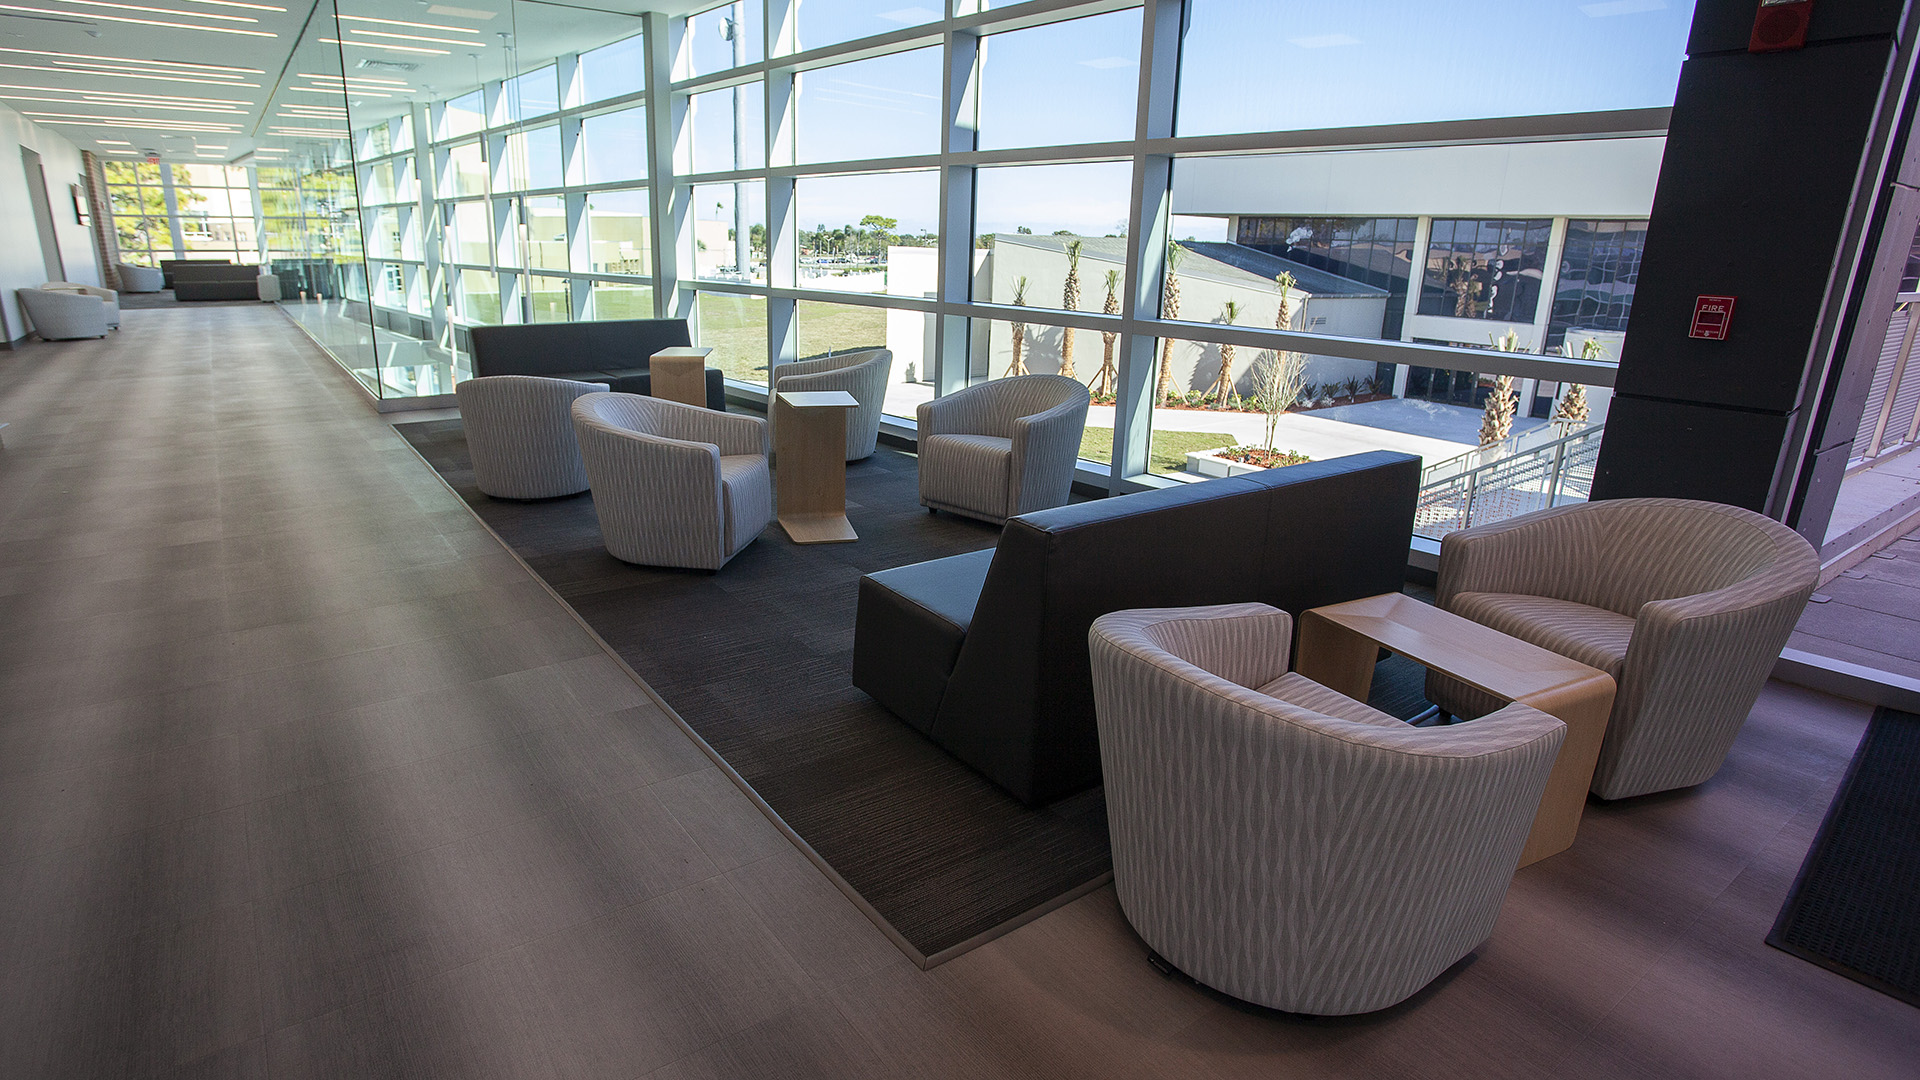 A wide shot photo of the upstairs area with lounge chairs and tables in the student union